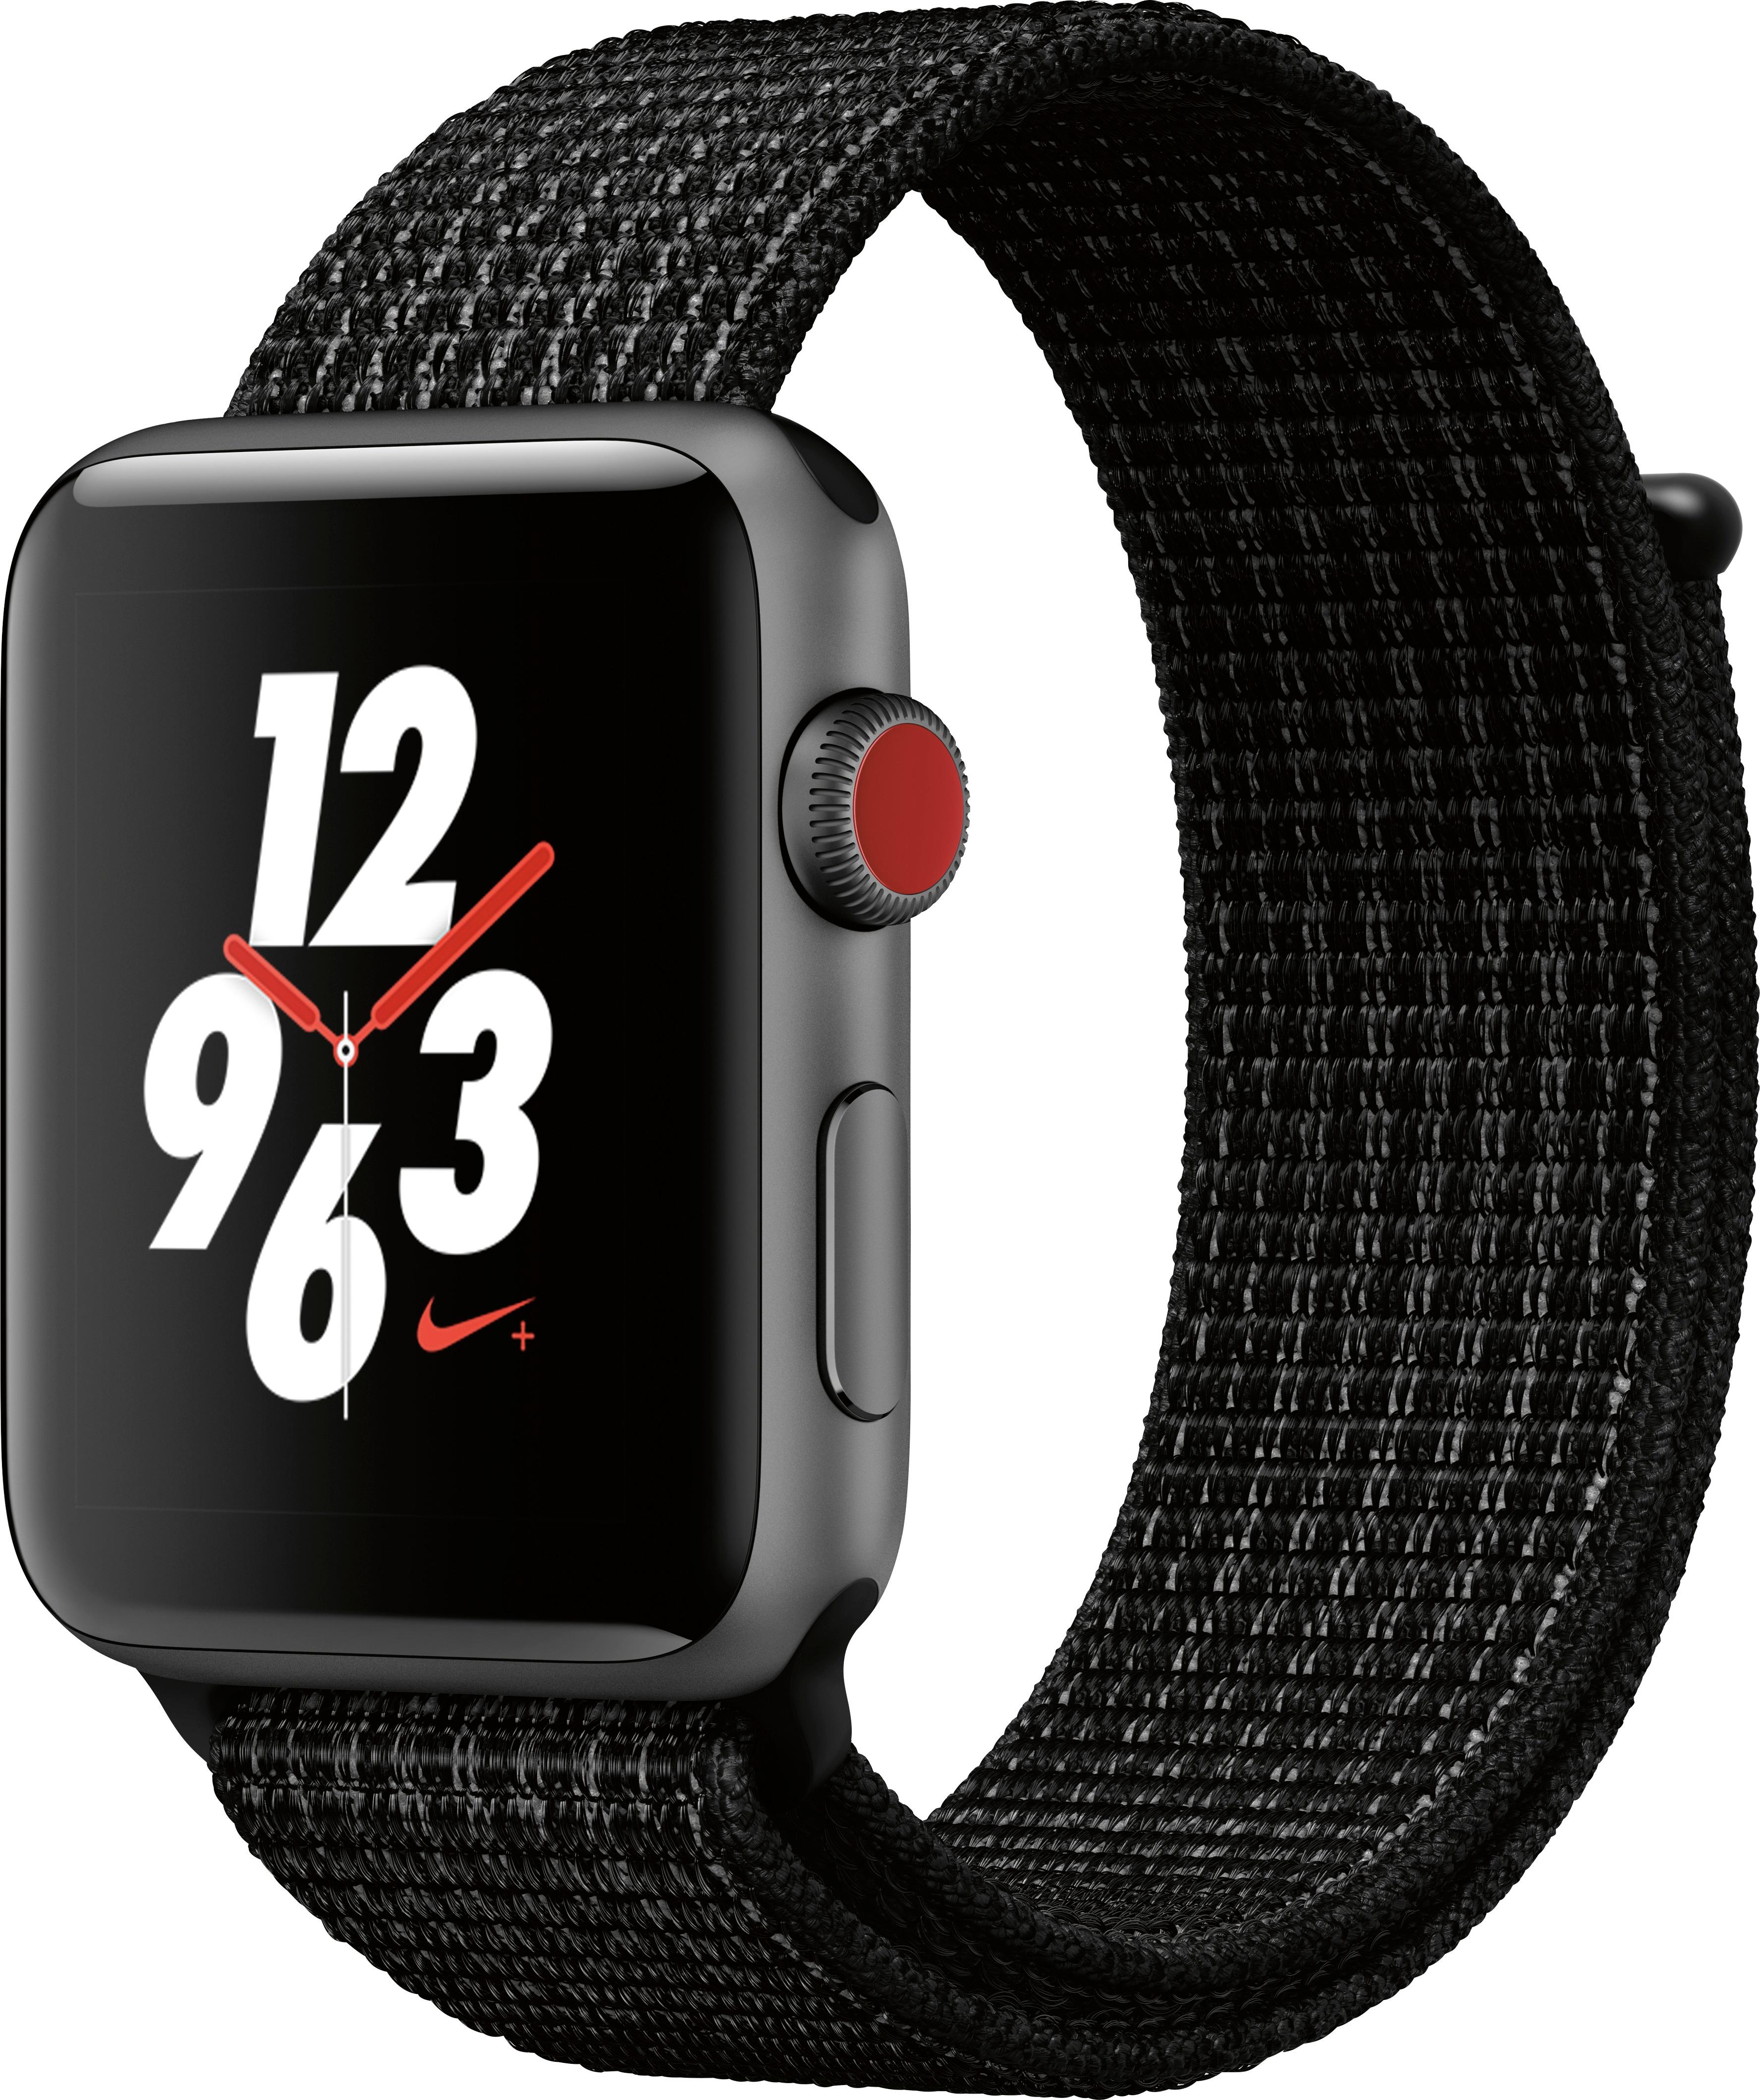 solar champán deberes apple watch series 3 nike vs normal Today's Deals- OFF-52% >Free Delivery